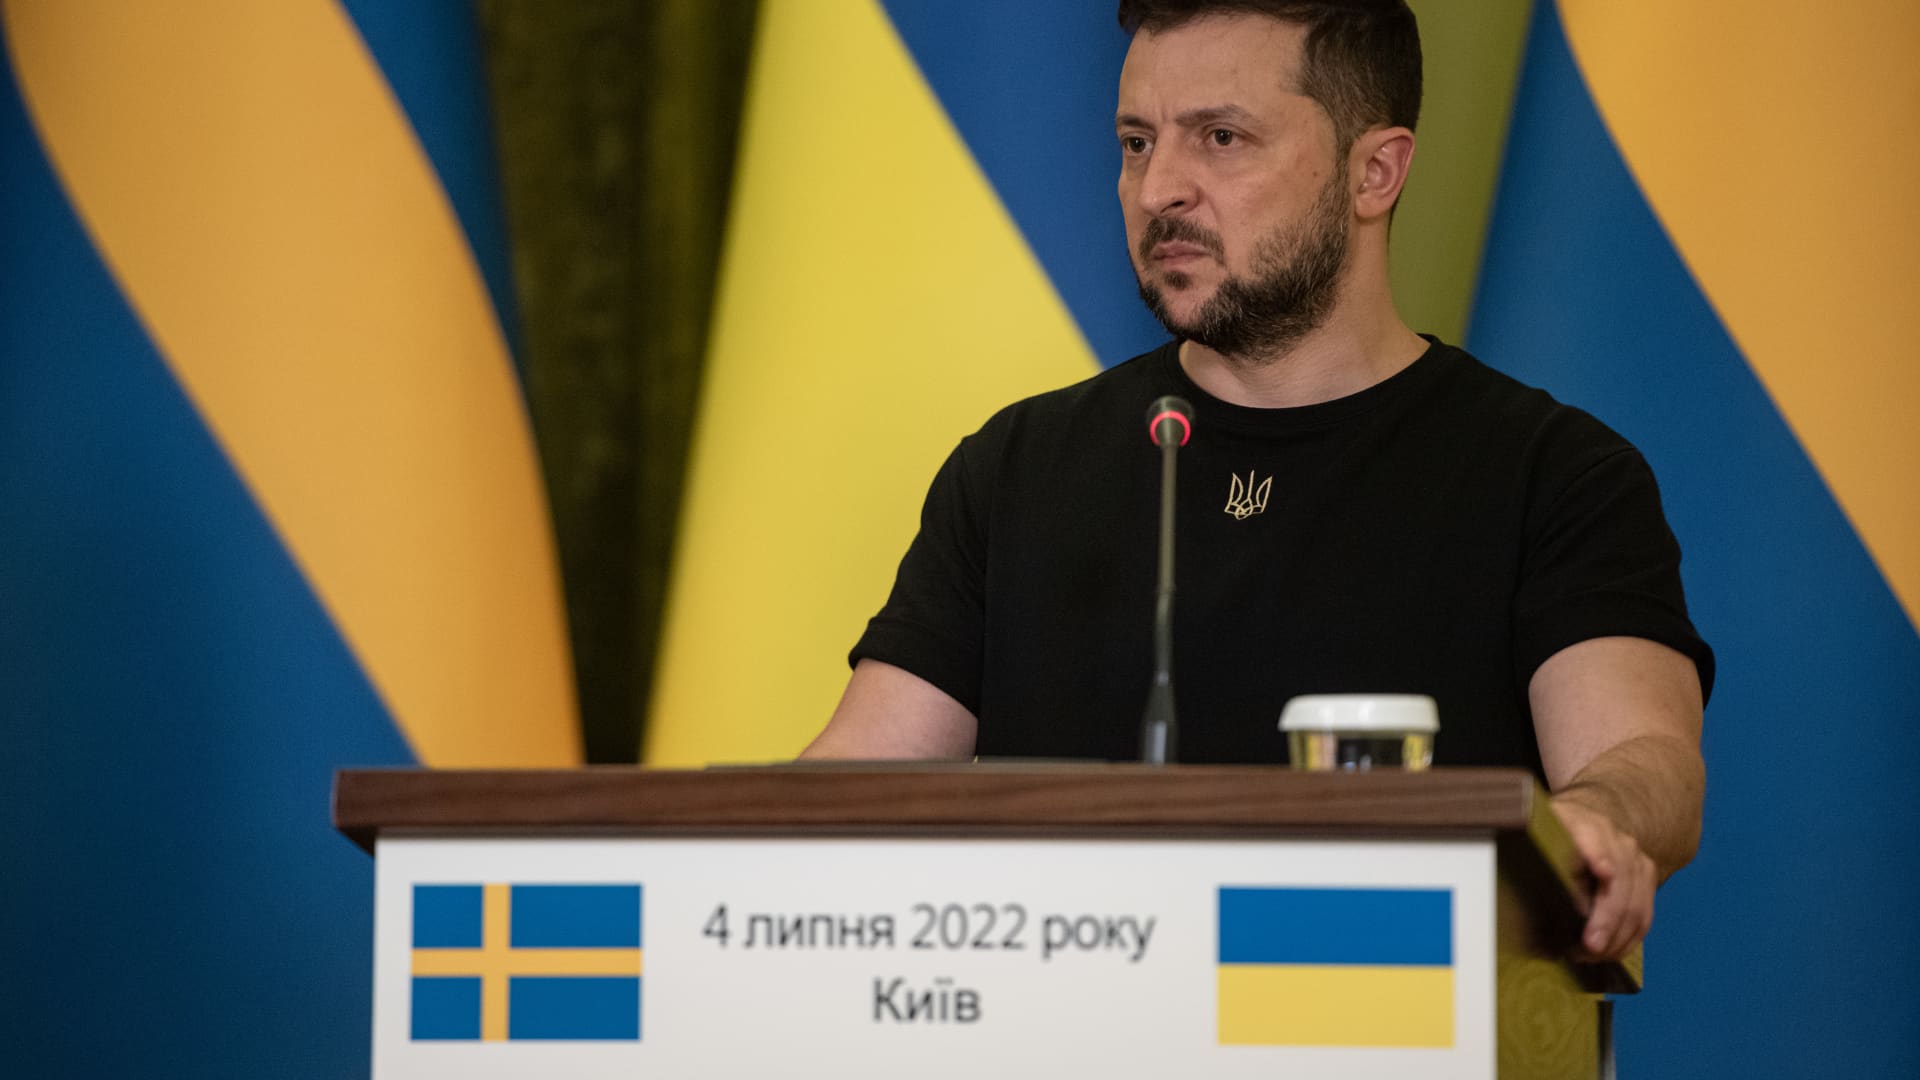 Ukrainian President Volodymyr Zelensky is seen during a joint press conference with Swedish Prime Minister Magdalena Andersson on July 4, 2022 in Kyiv, Ukraine. Zelenskyy is seeking an opportunity for direct talks with Chinese leader Xi Jinping to help end Russia's unprovoked war in Ukraine, the South China Morning Post reported.